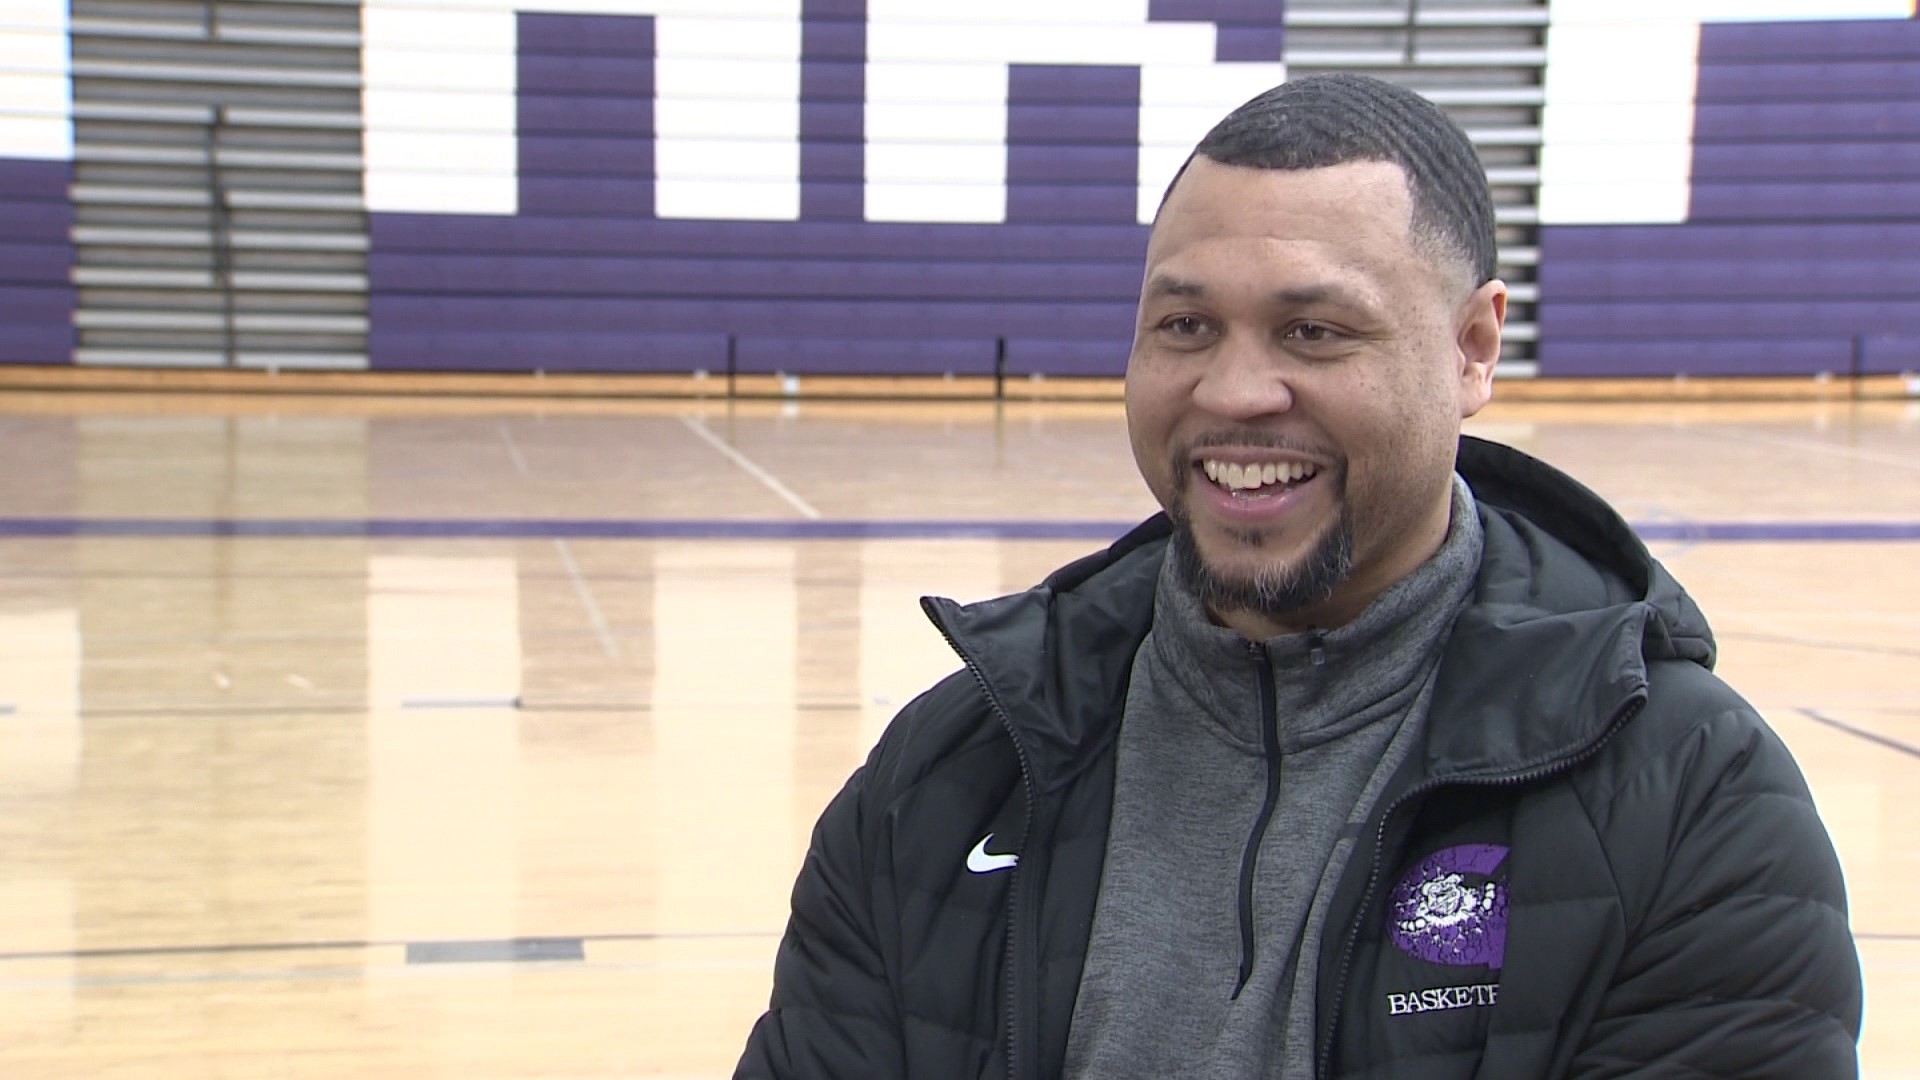 In the next phase of his career, Roy is leading the Garfield High School boy's basketball team to repeated success.